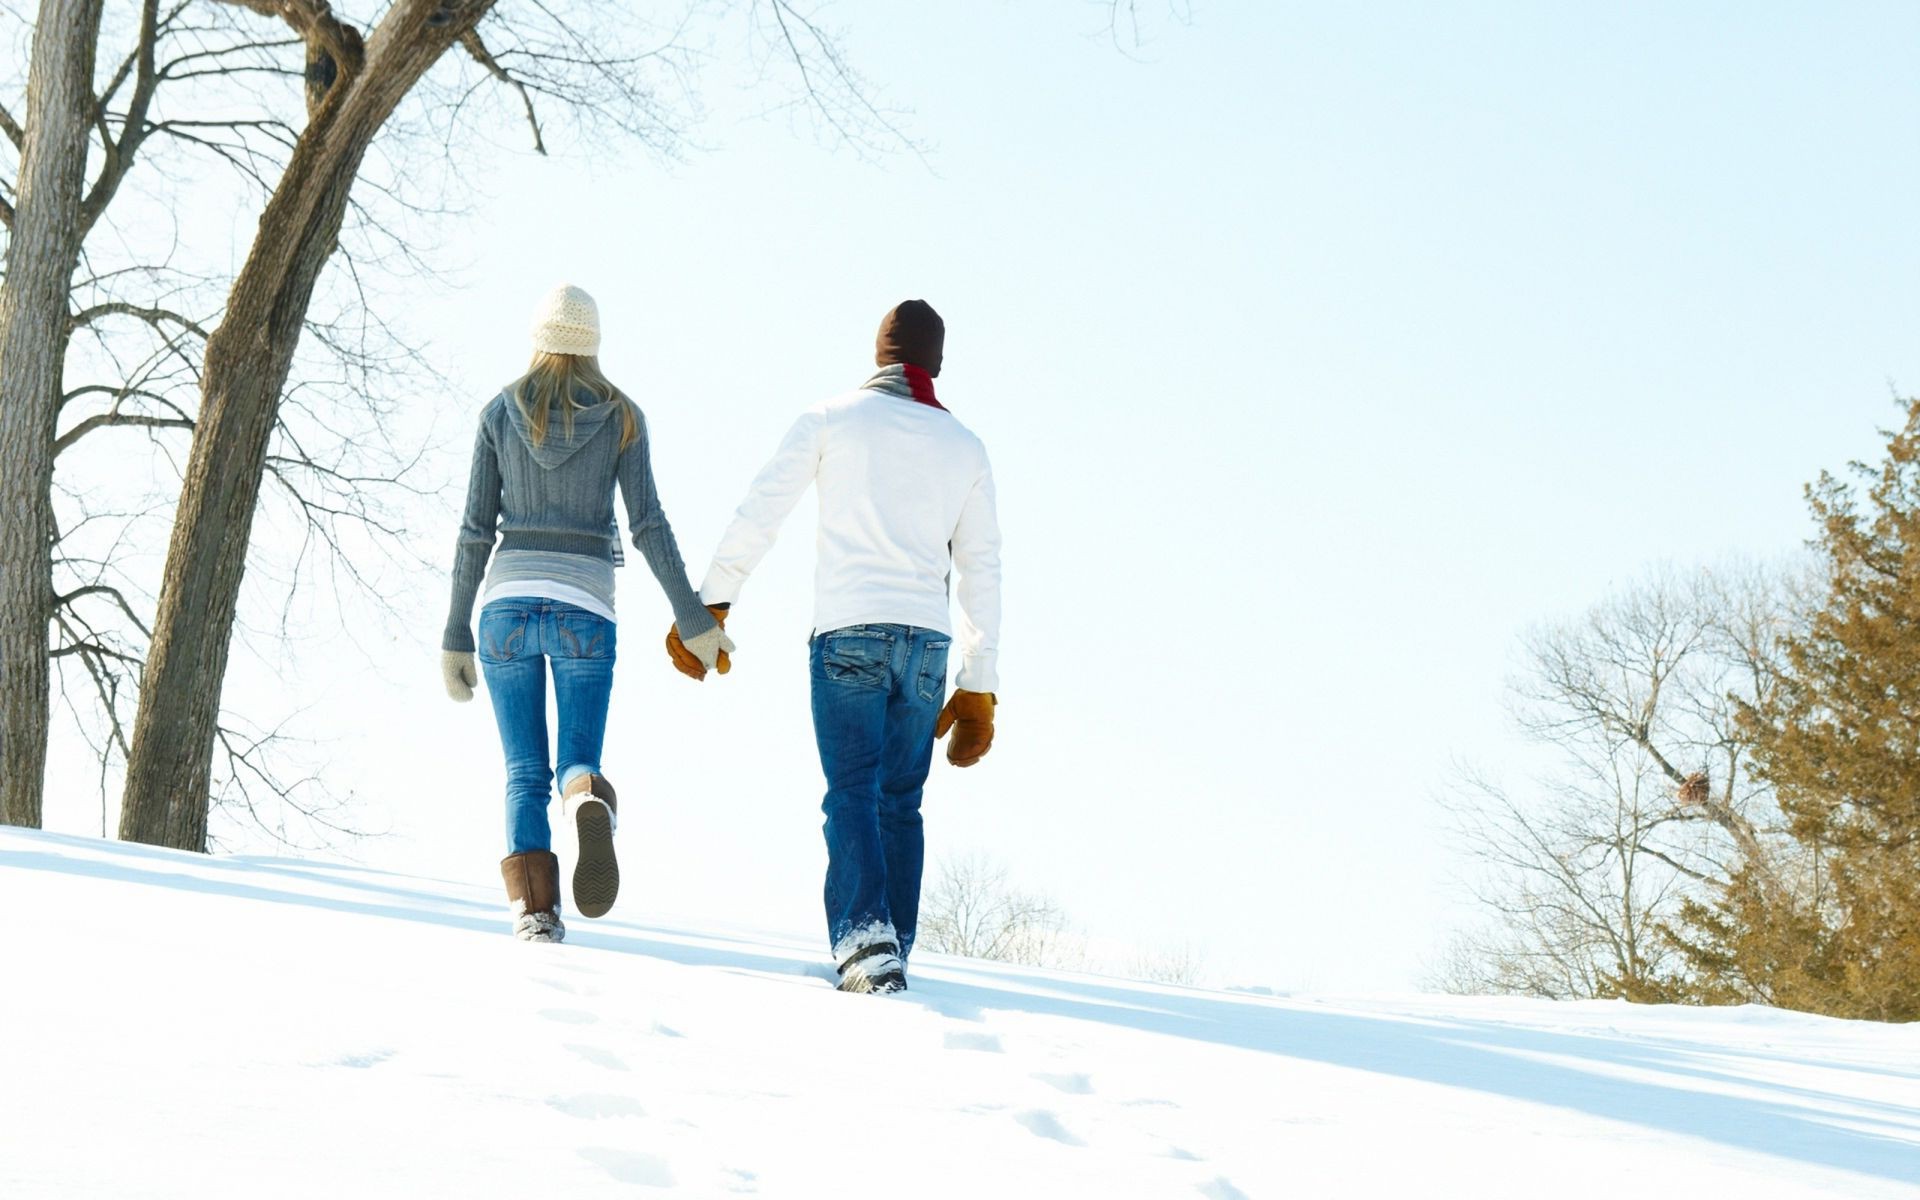 couples winter snow cold outdoors wood tree landscape daylight weather man ice togetherness nature frost frozen